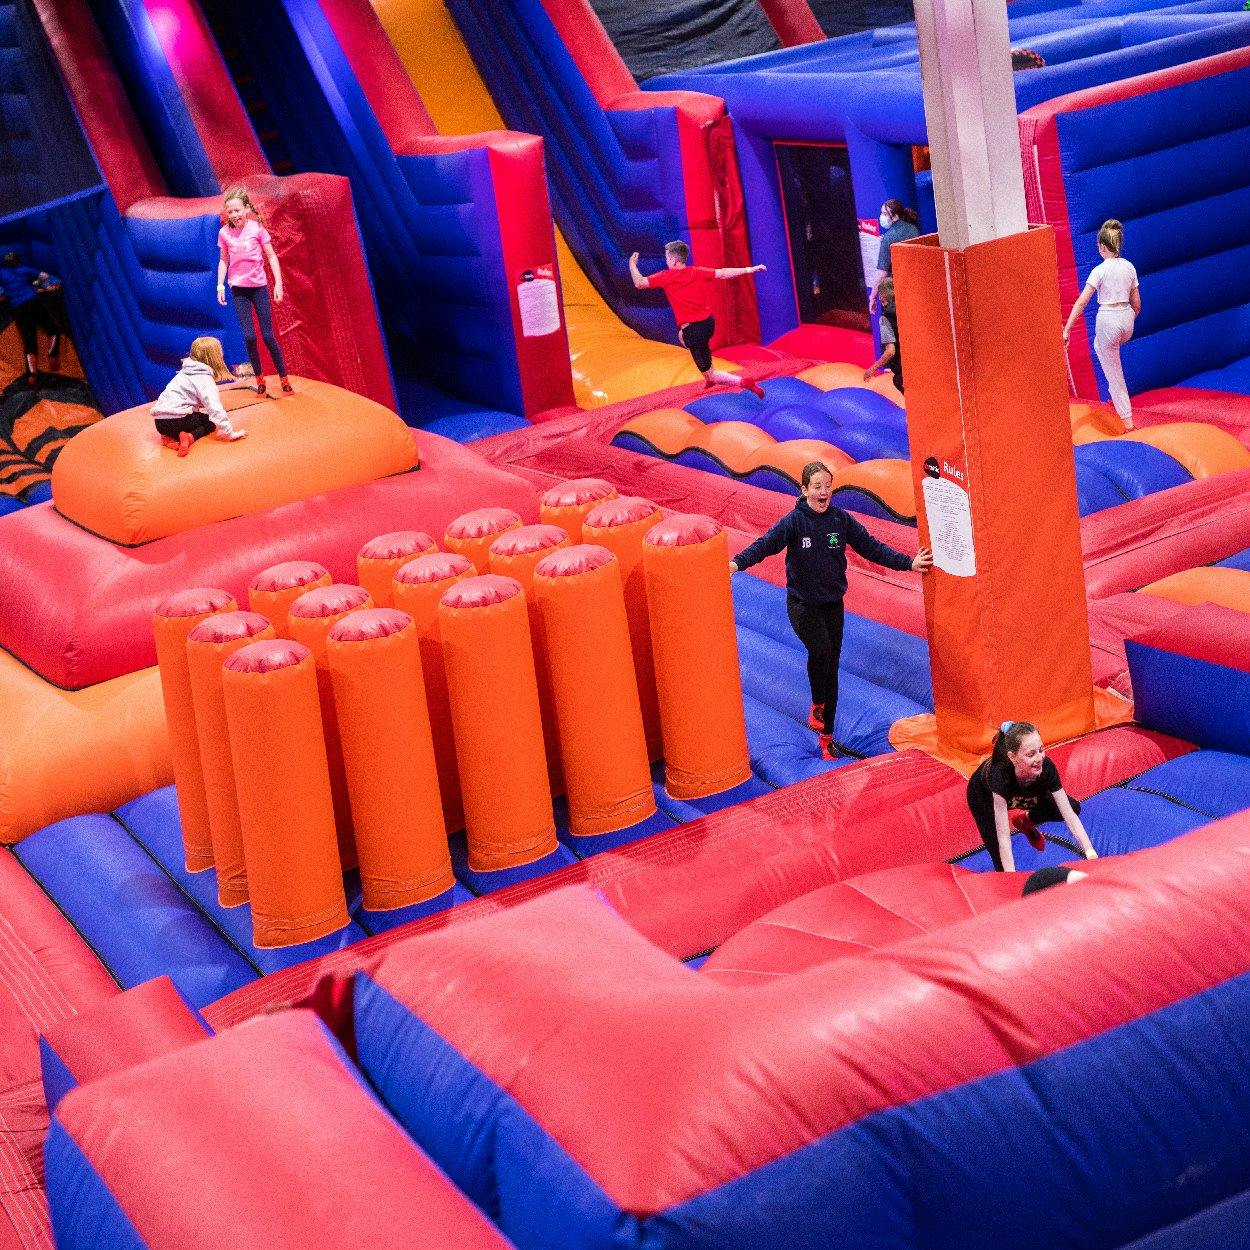 Cover Image for Iflata at Newtonabbey, Ireland: Our new AirX Inflatable Theme Park for Airtastic